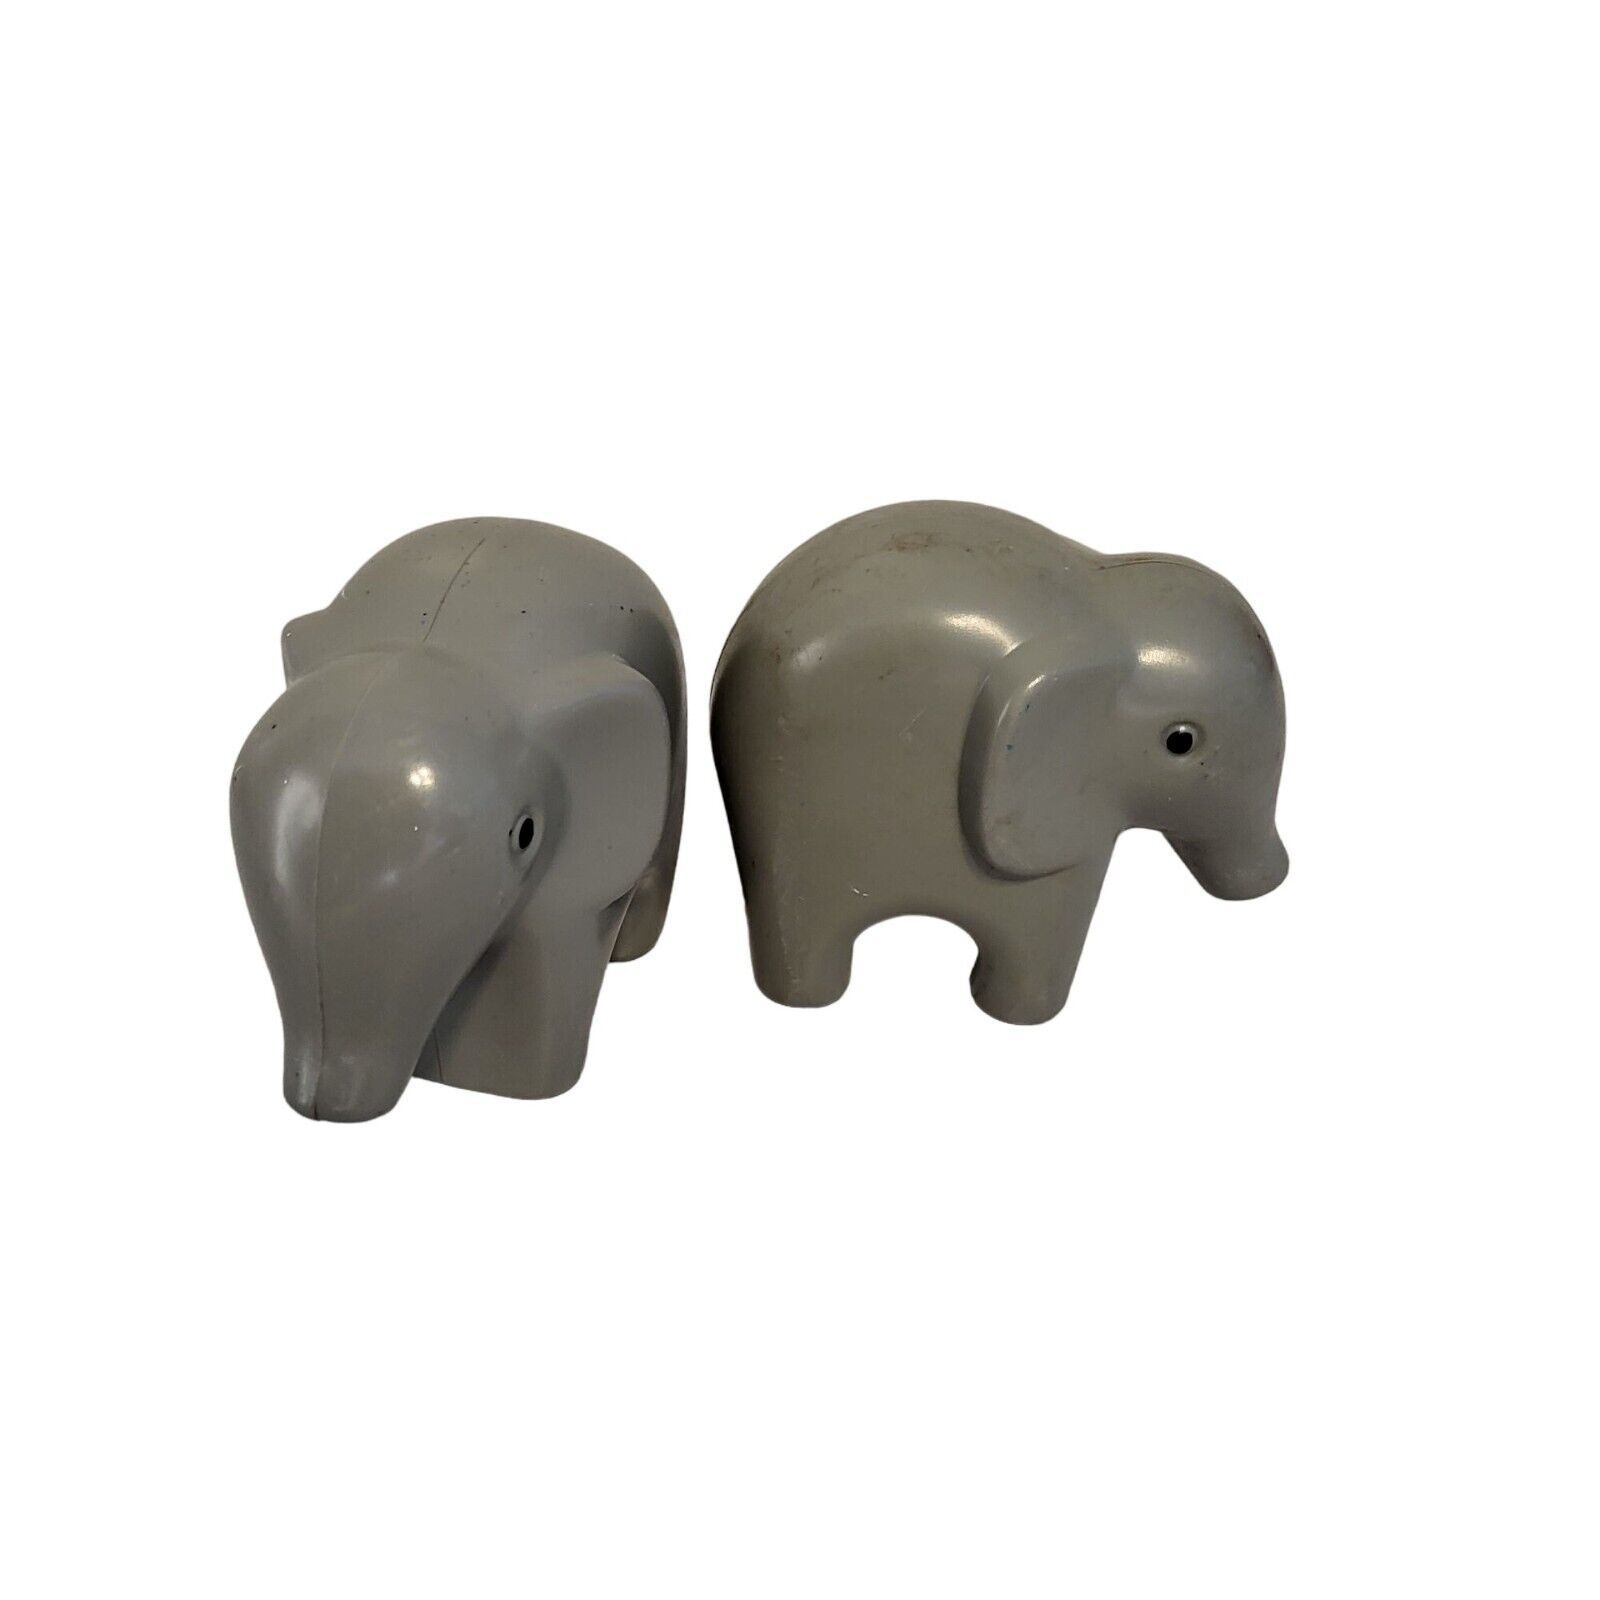 Primary image for Vintage Little Tikes Noah's Ark Replacement Animals Set of Gray Elephants 3.5 in